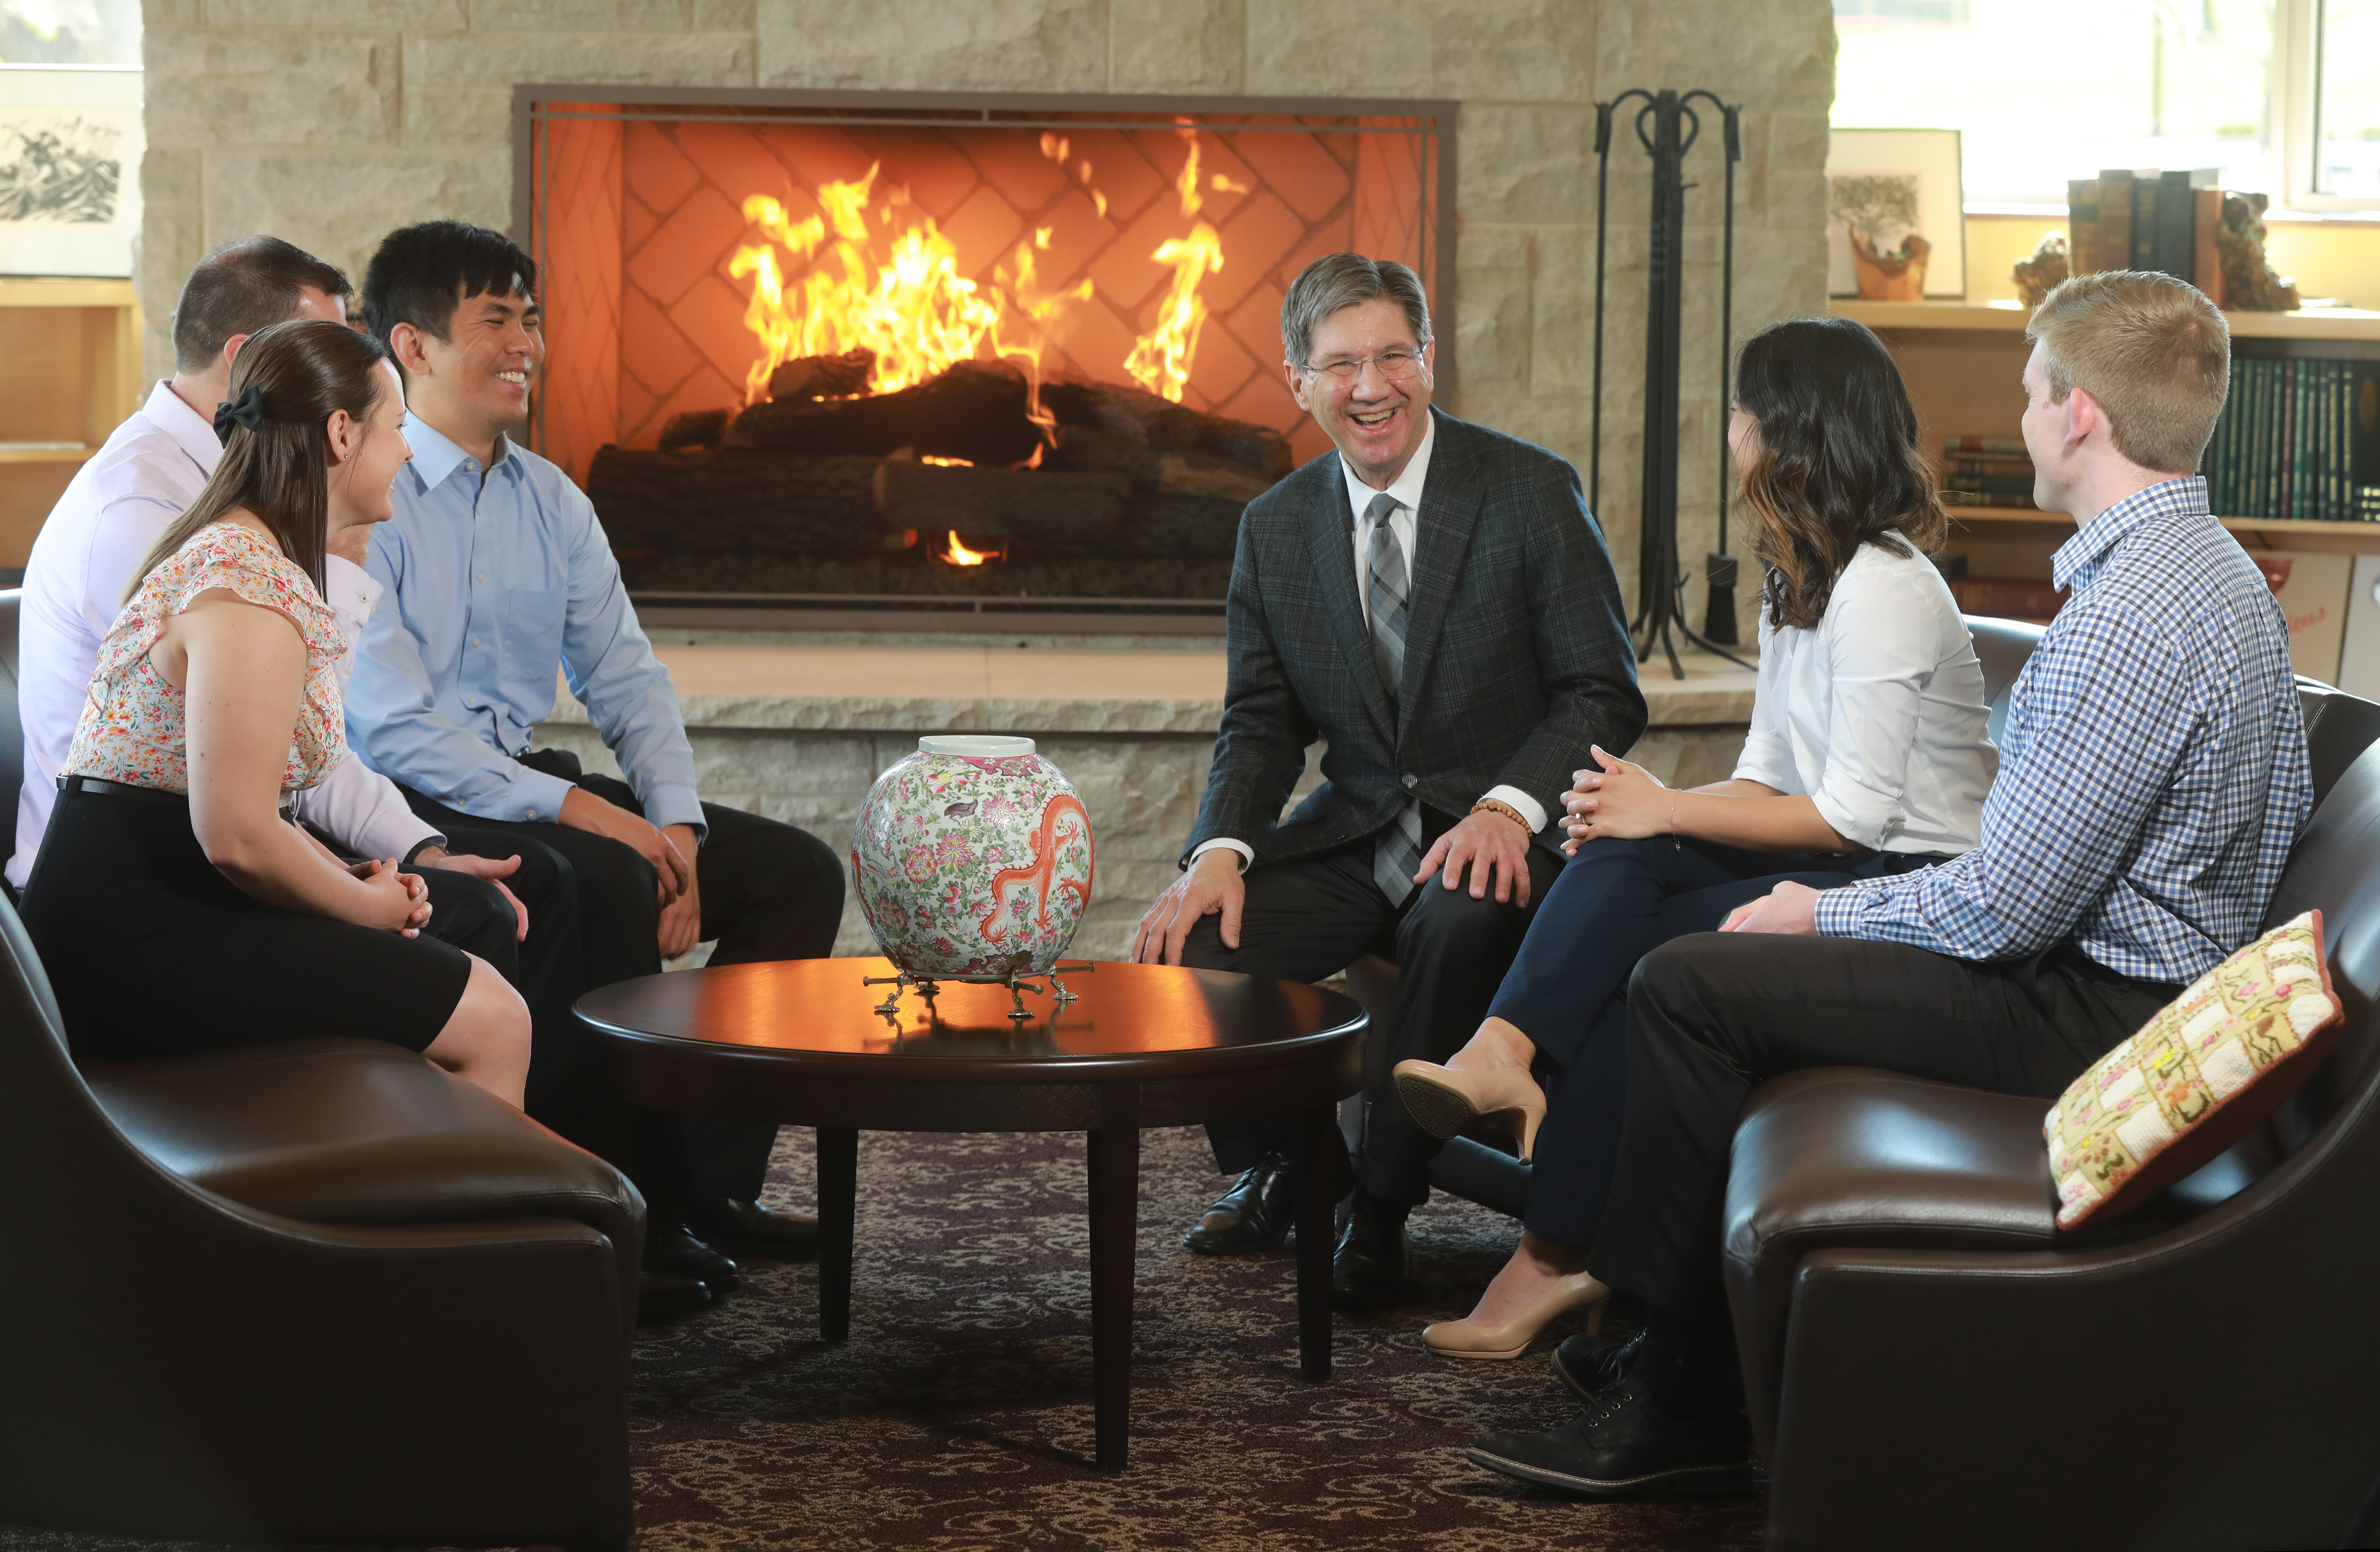 Dr. Nemitz sitting with students in front of fire in presidents parlor. All students face the president, he seems to be laughing.